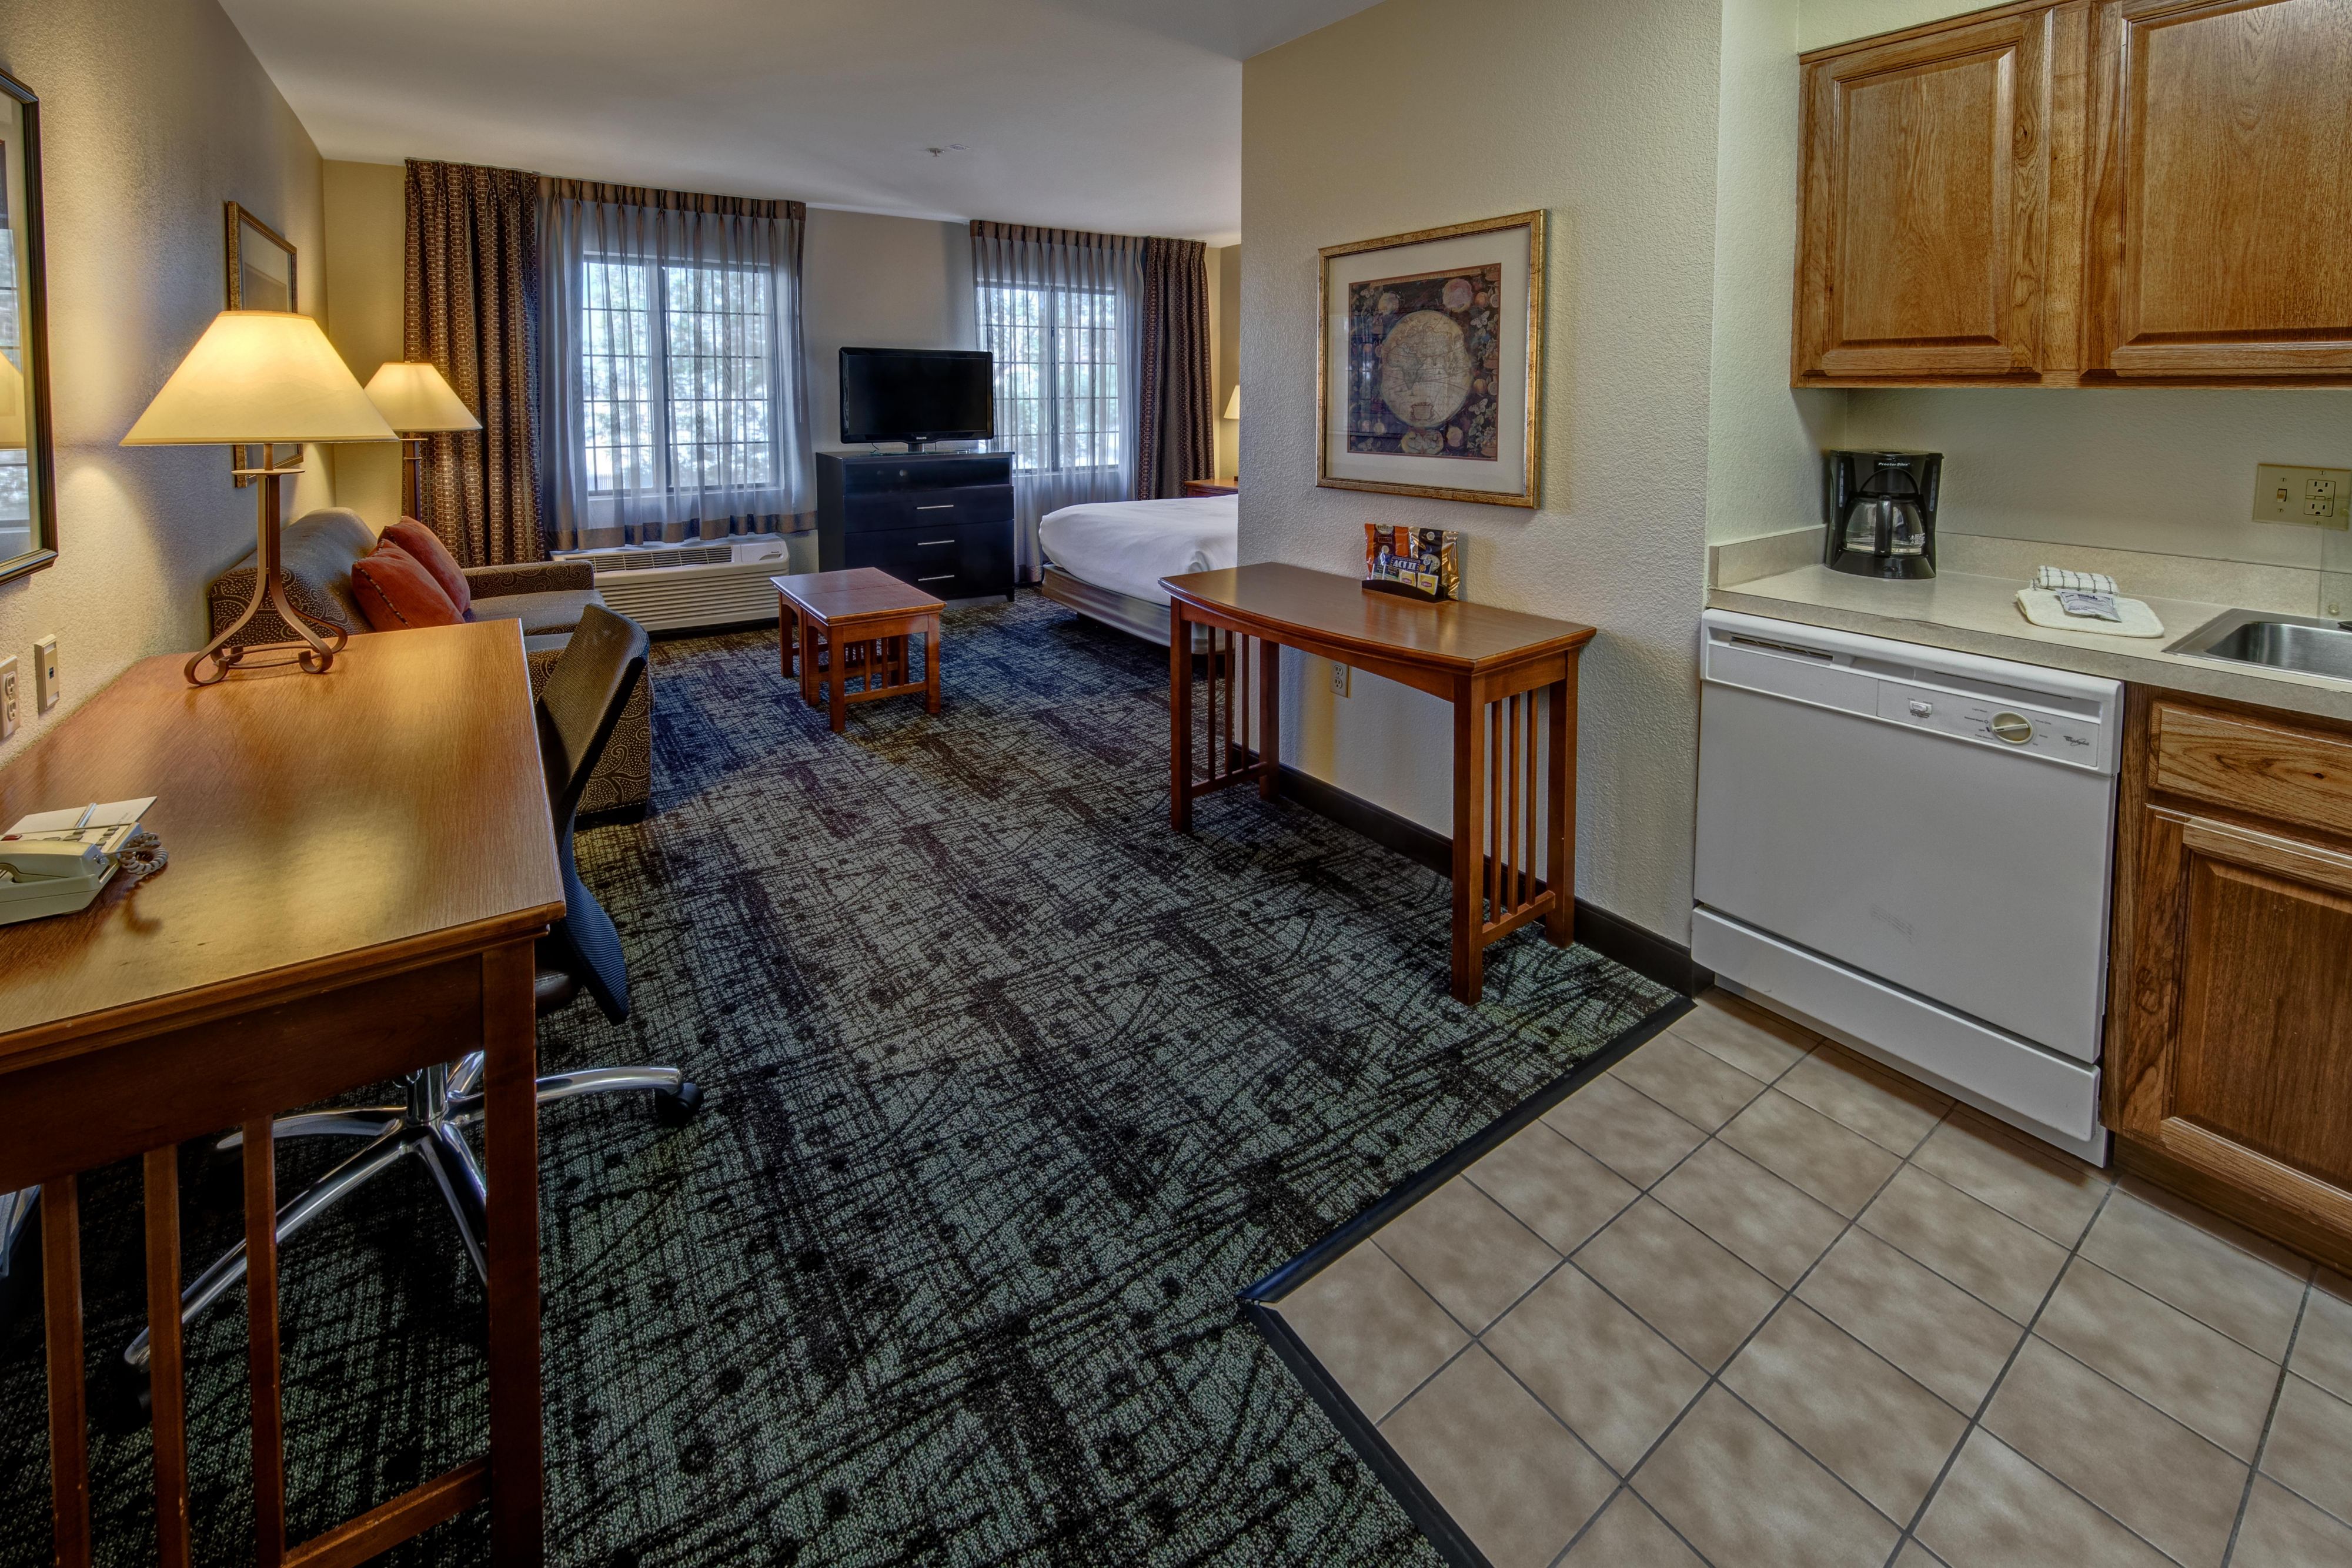 Our accommodations and rates are designed with extended-stay travelers in mind. Learn about our special rates based on the length of your stay, and enjoy saving more by staying with us longer.